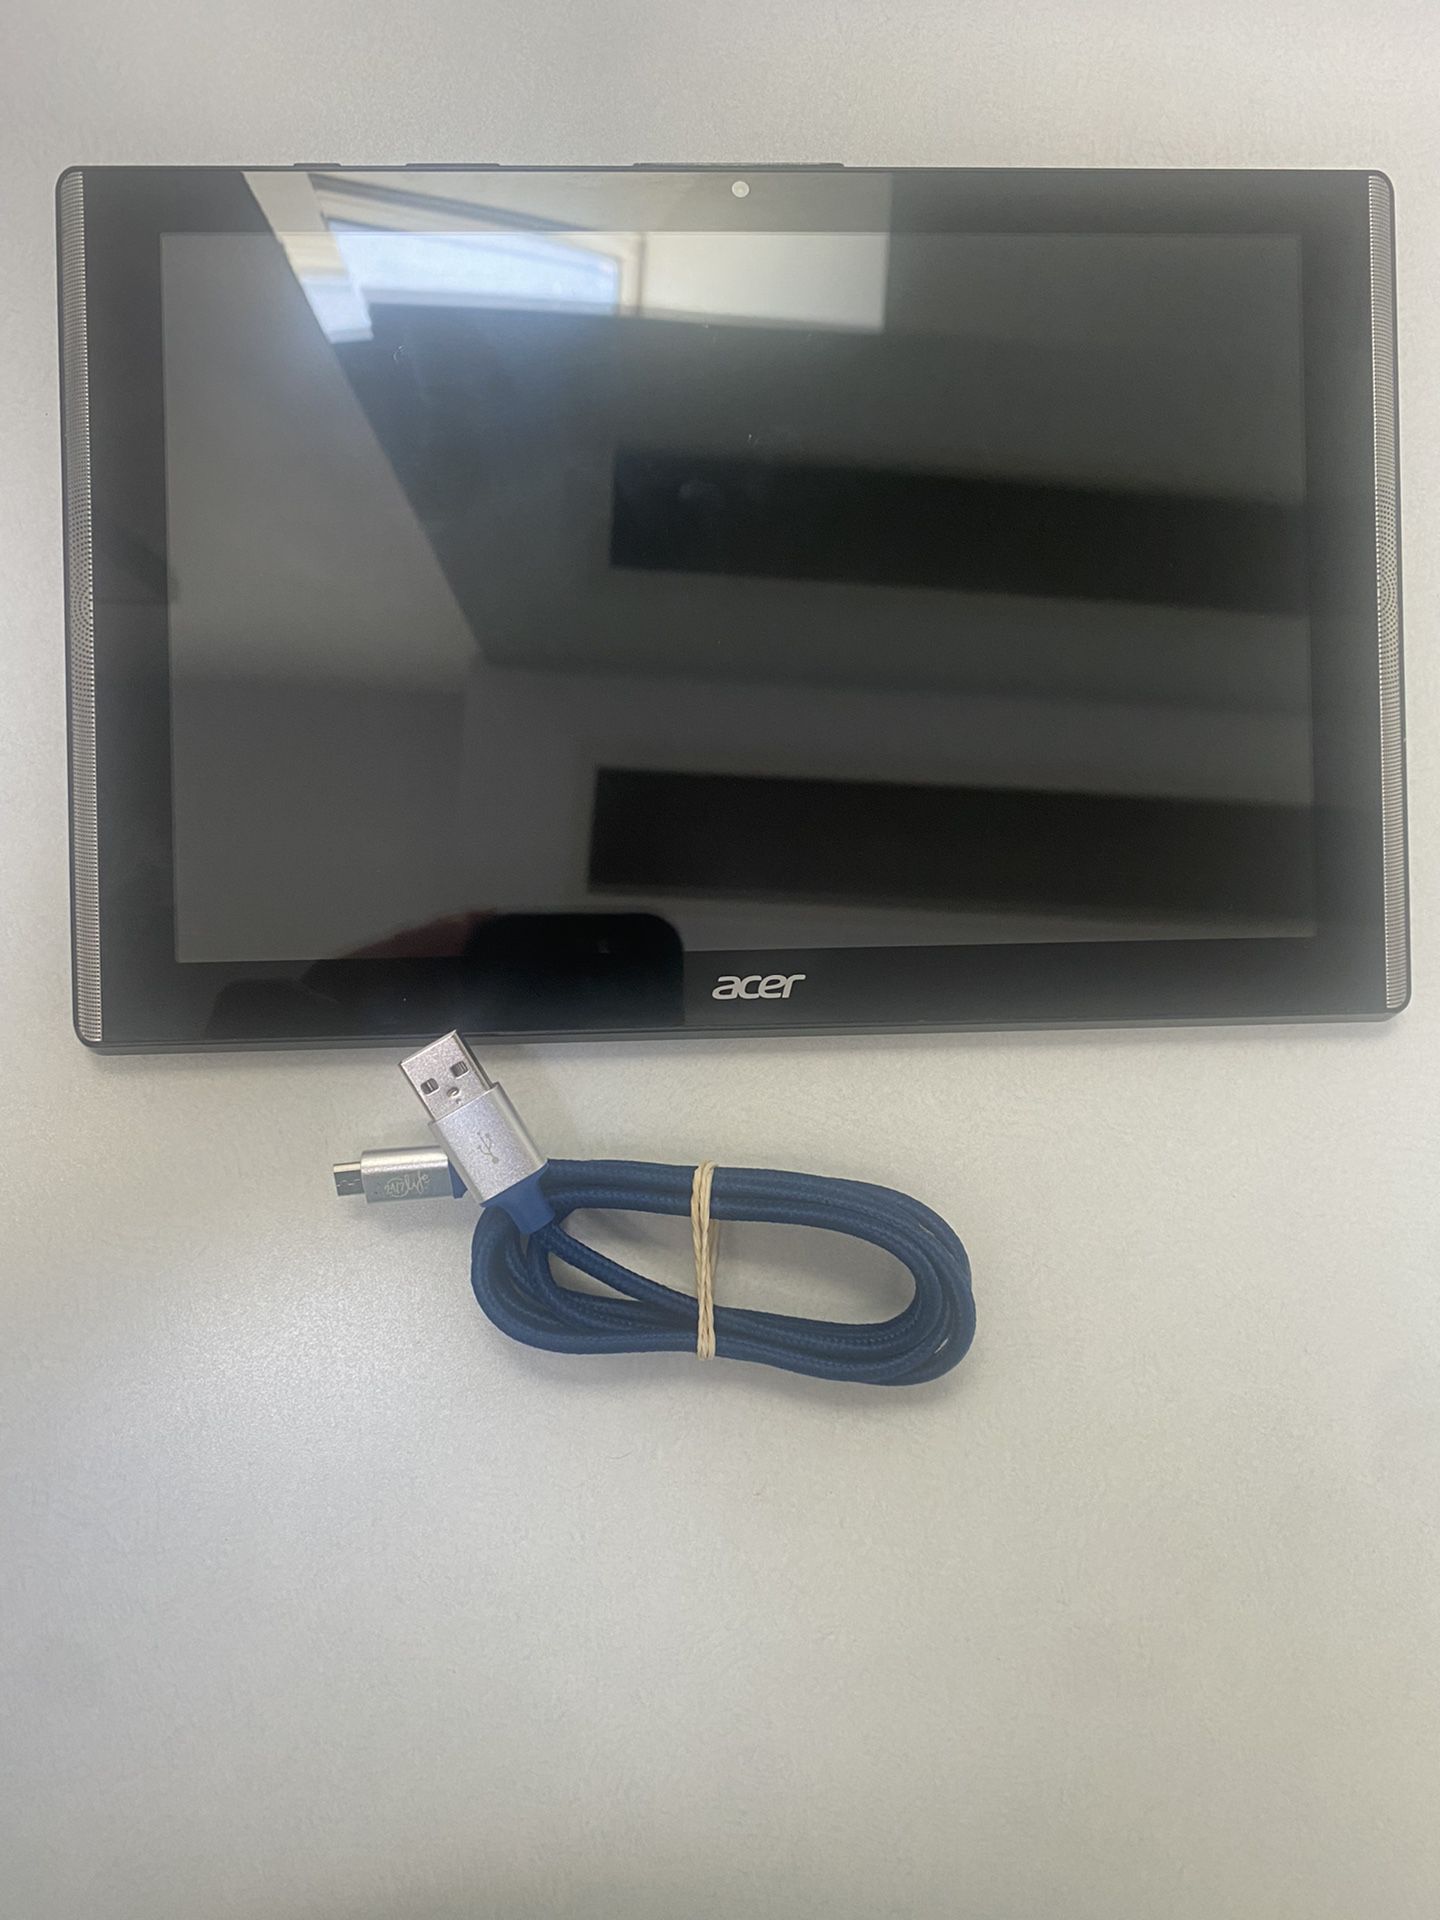 Acer Iconia 1 Tablet Works Great Comes With Charger 